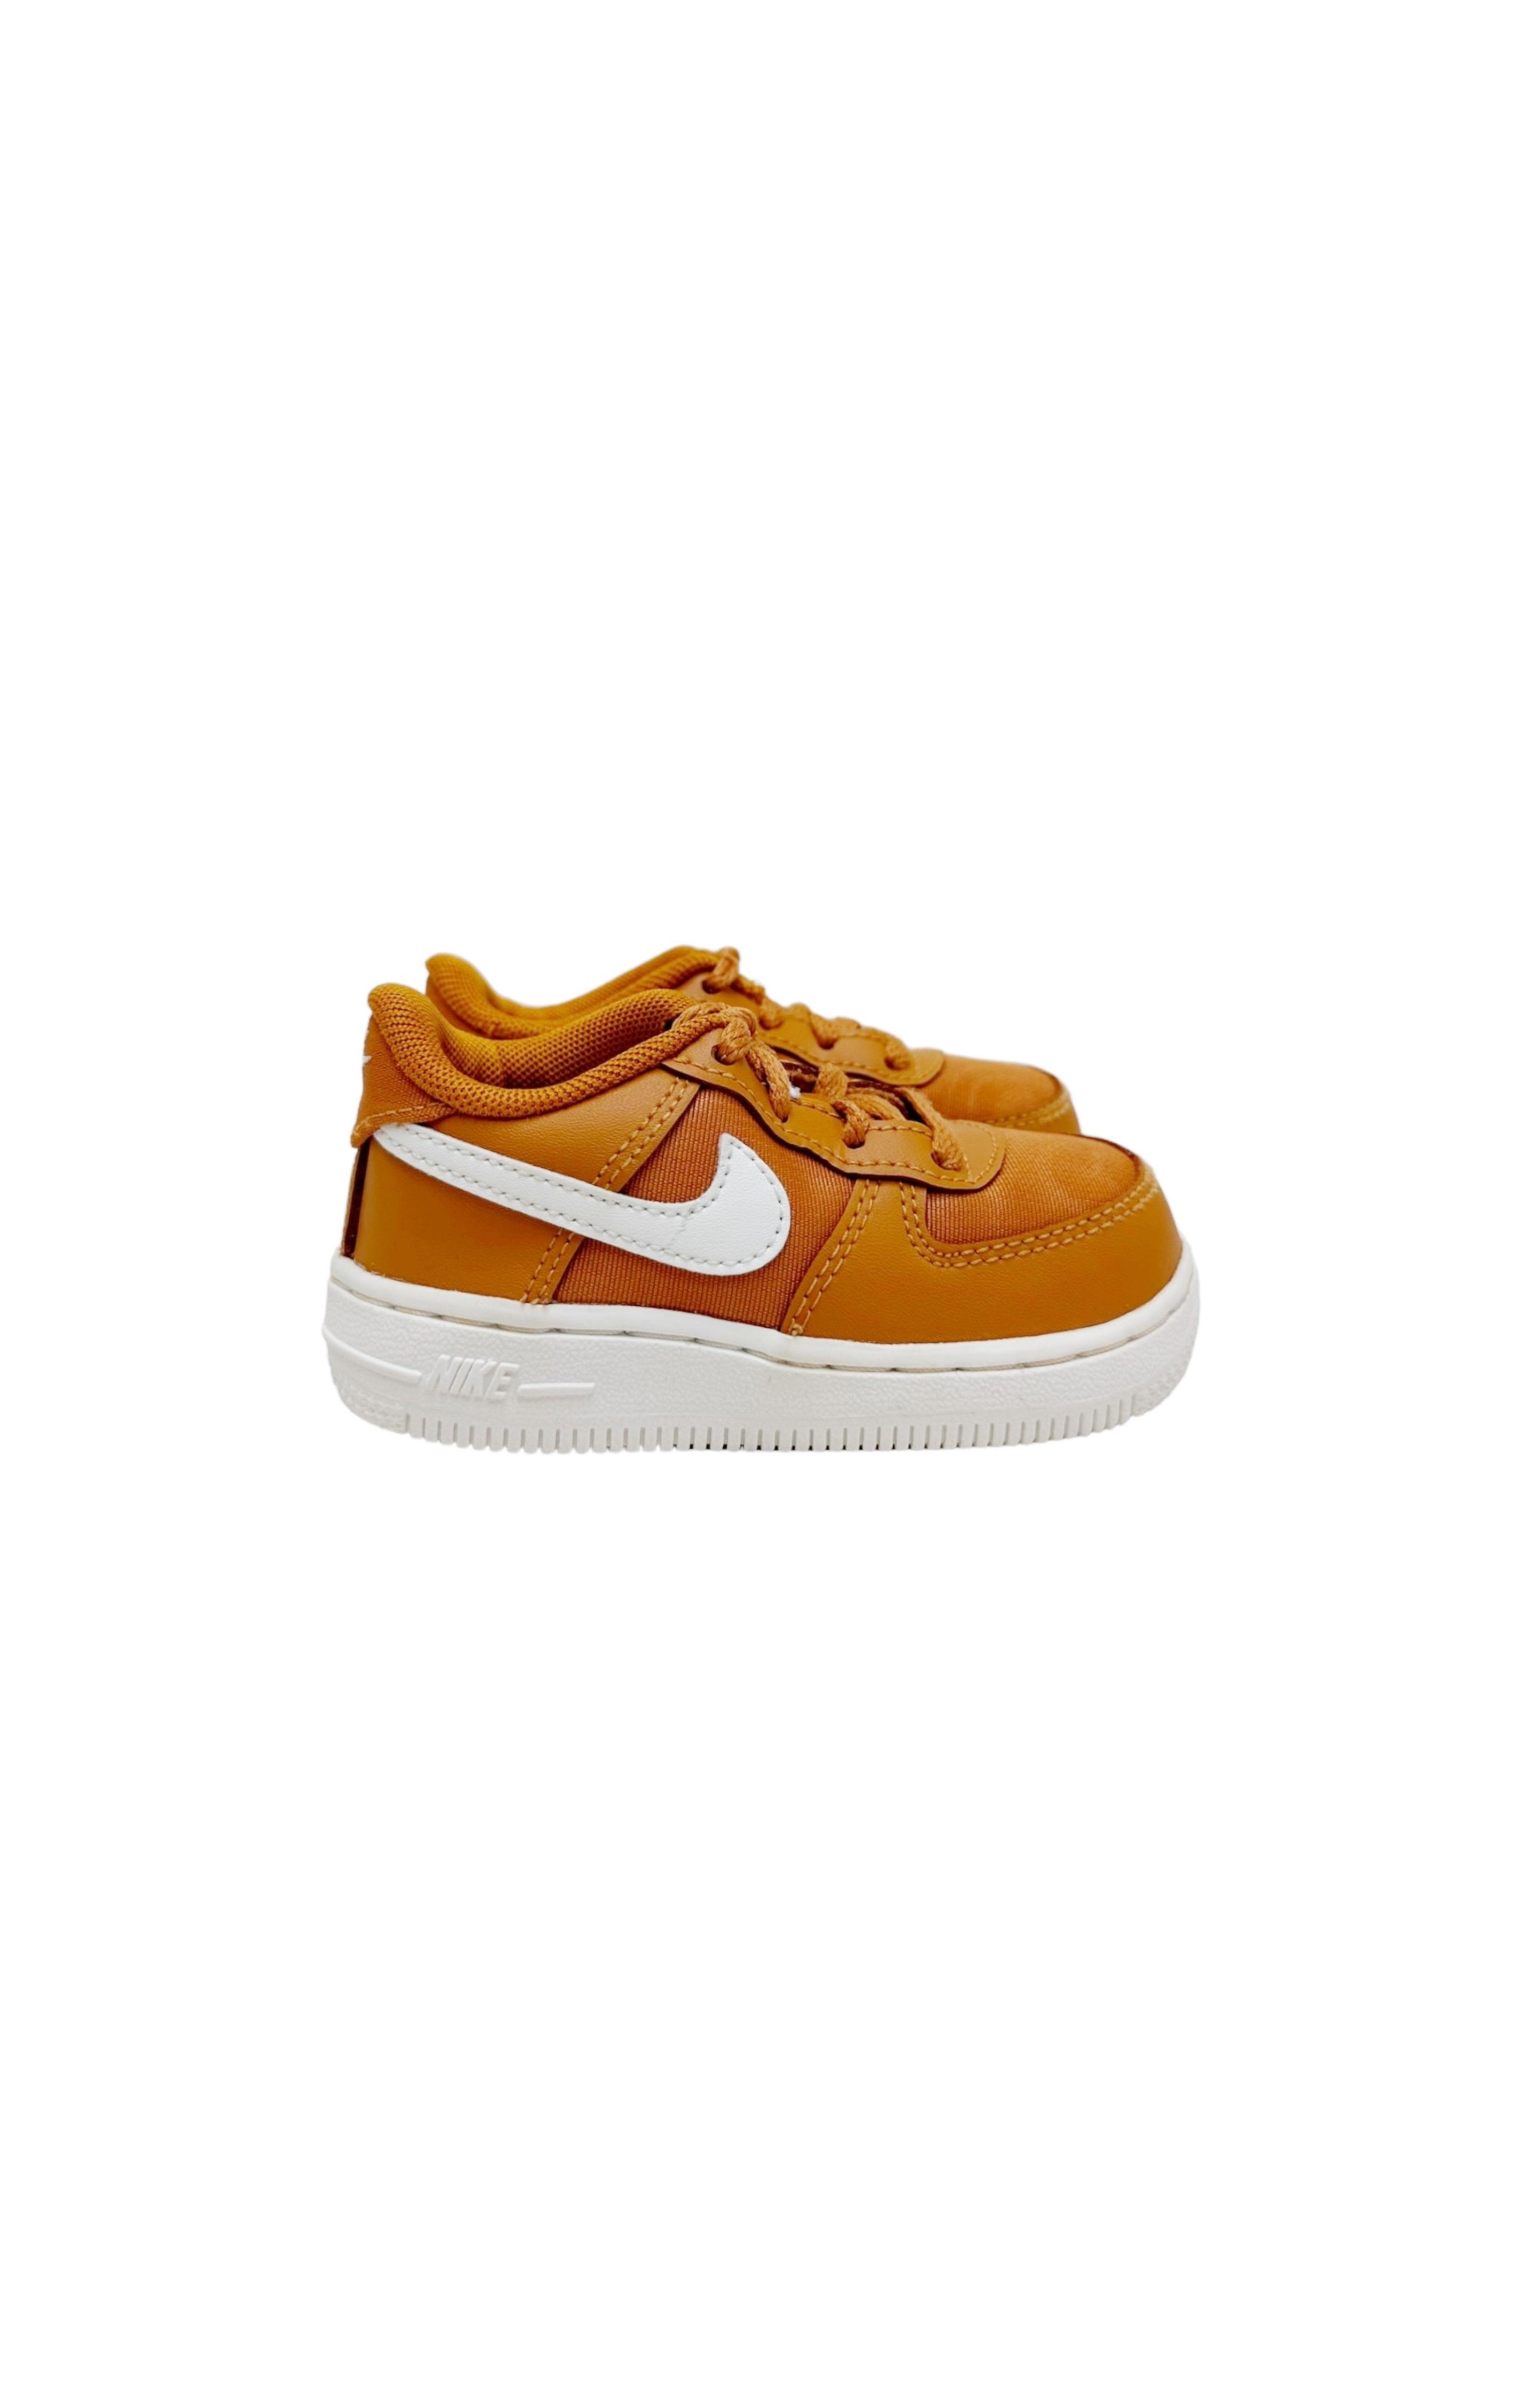 NIKE (RARE) Sneakers Size: Infant US 6C